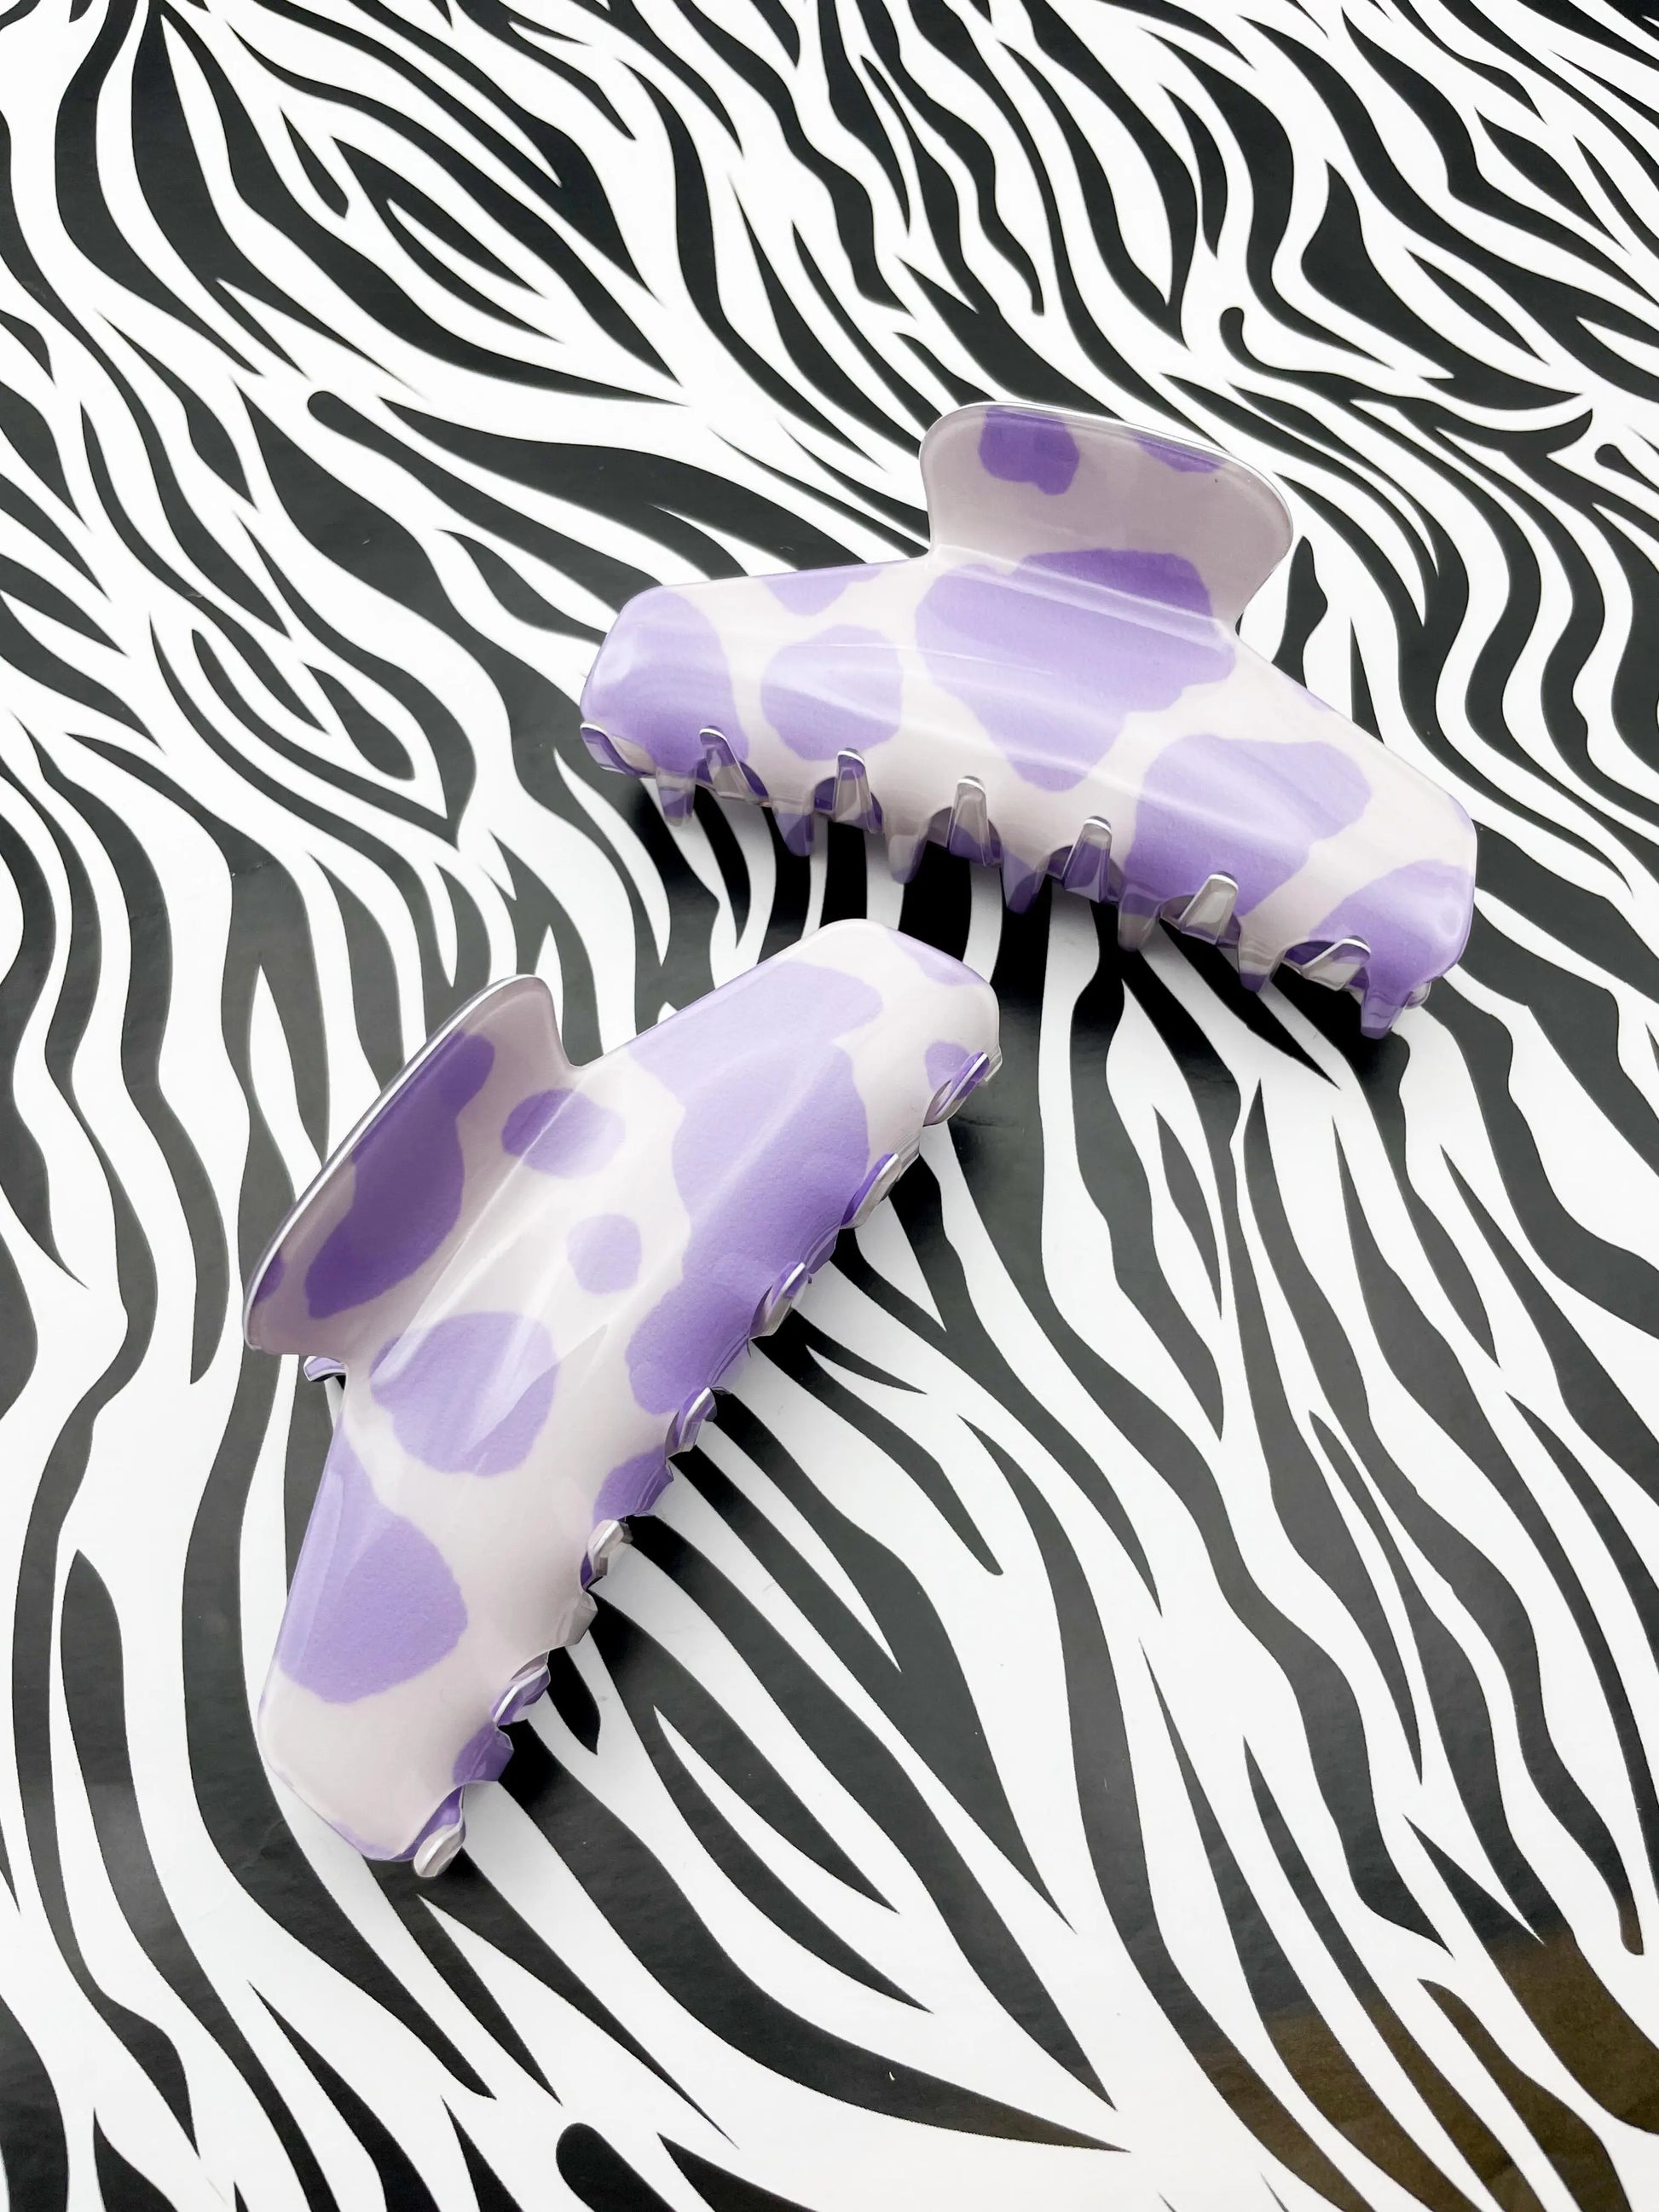 Large Lilac Cow Print Claw Hair Clip from Sapphire Frills